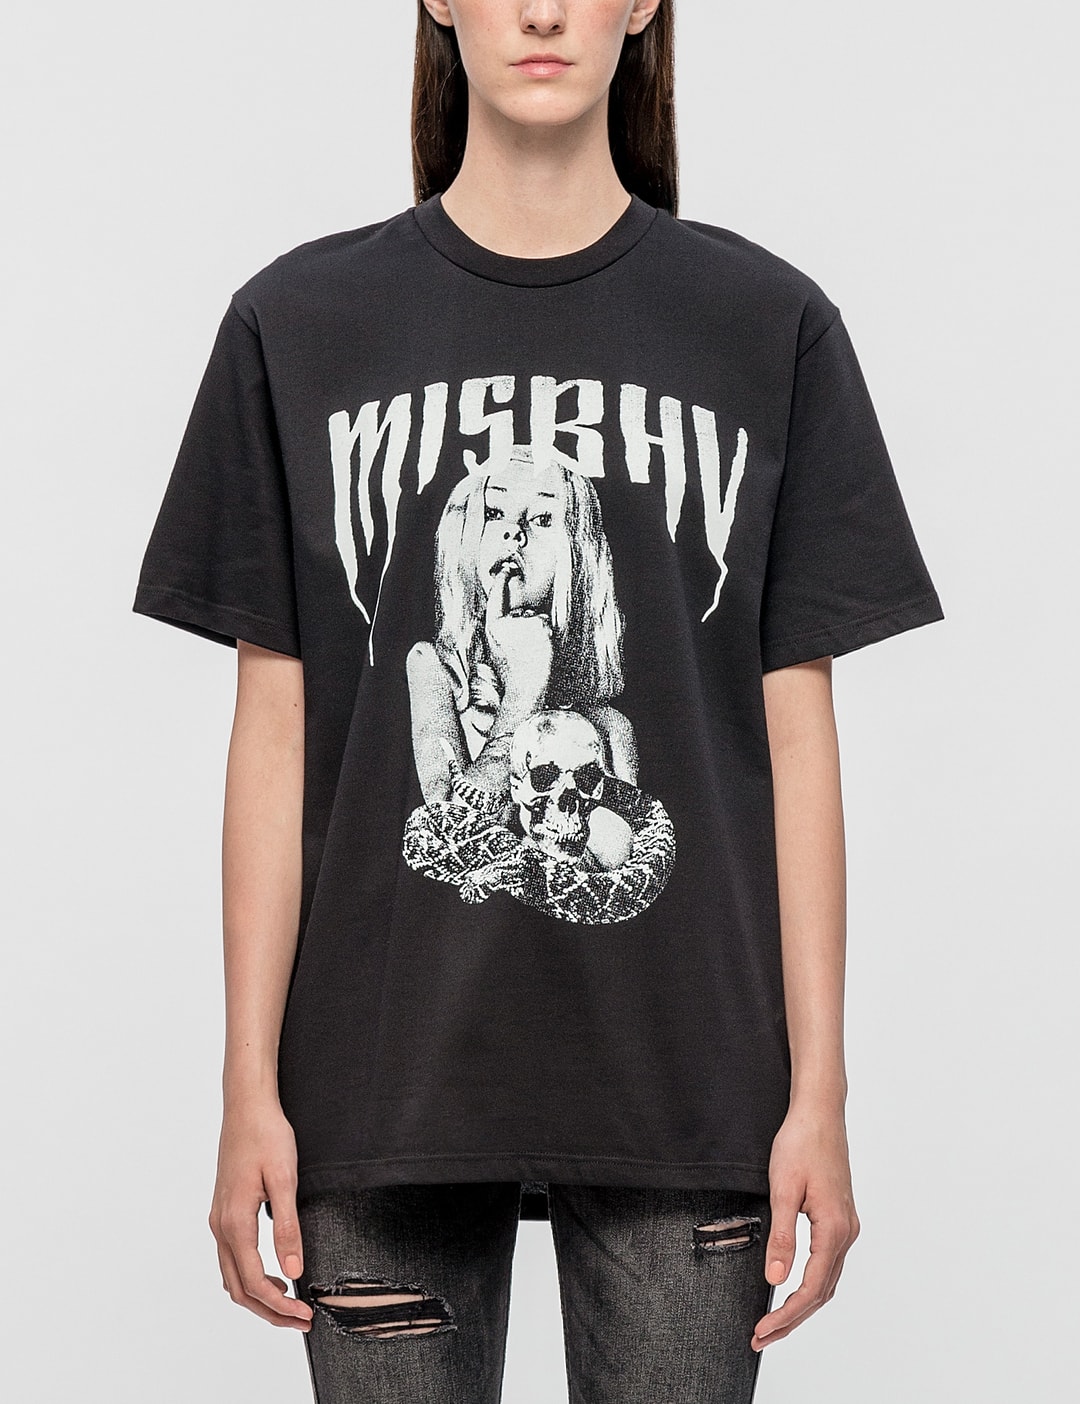 Misbhv - Girl T-Shirt | HBX - Globally Curated Fashion and Lifestyle by ...